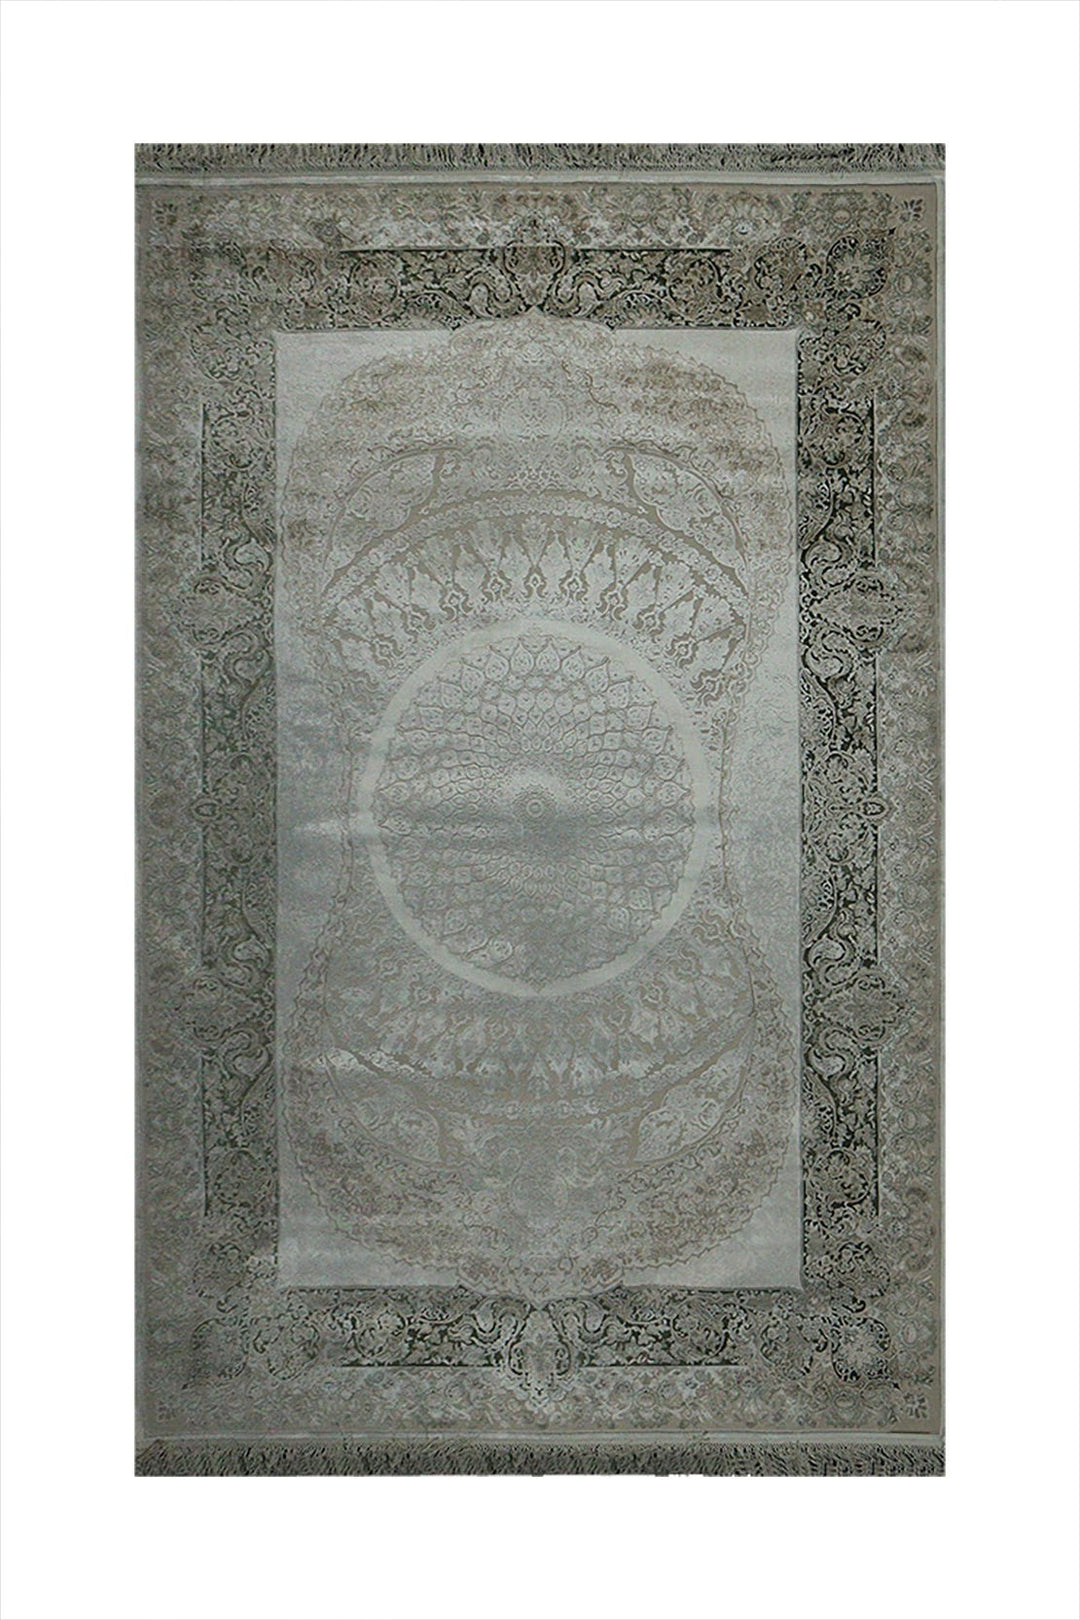 Turkish Premium Quality Voyage Rug - 5.2 x 7.5 FT - Beige - Resilient Construction for Long-Lasting Use - V Surfaces